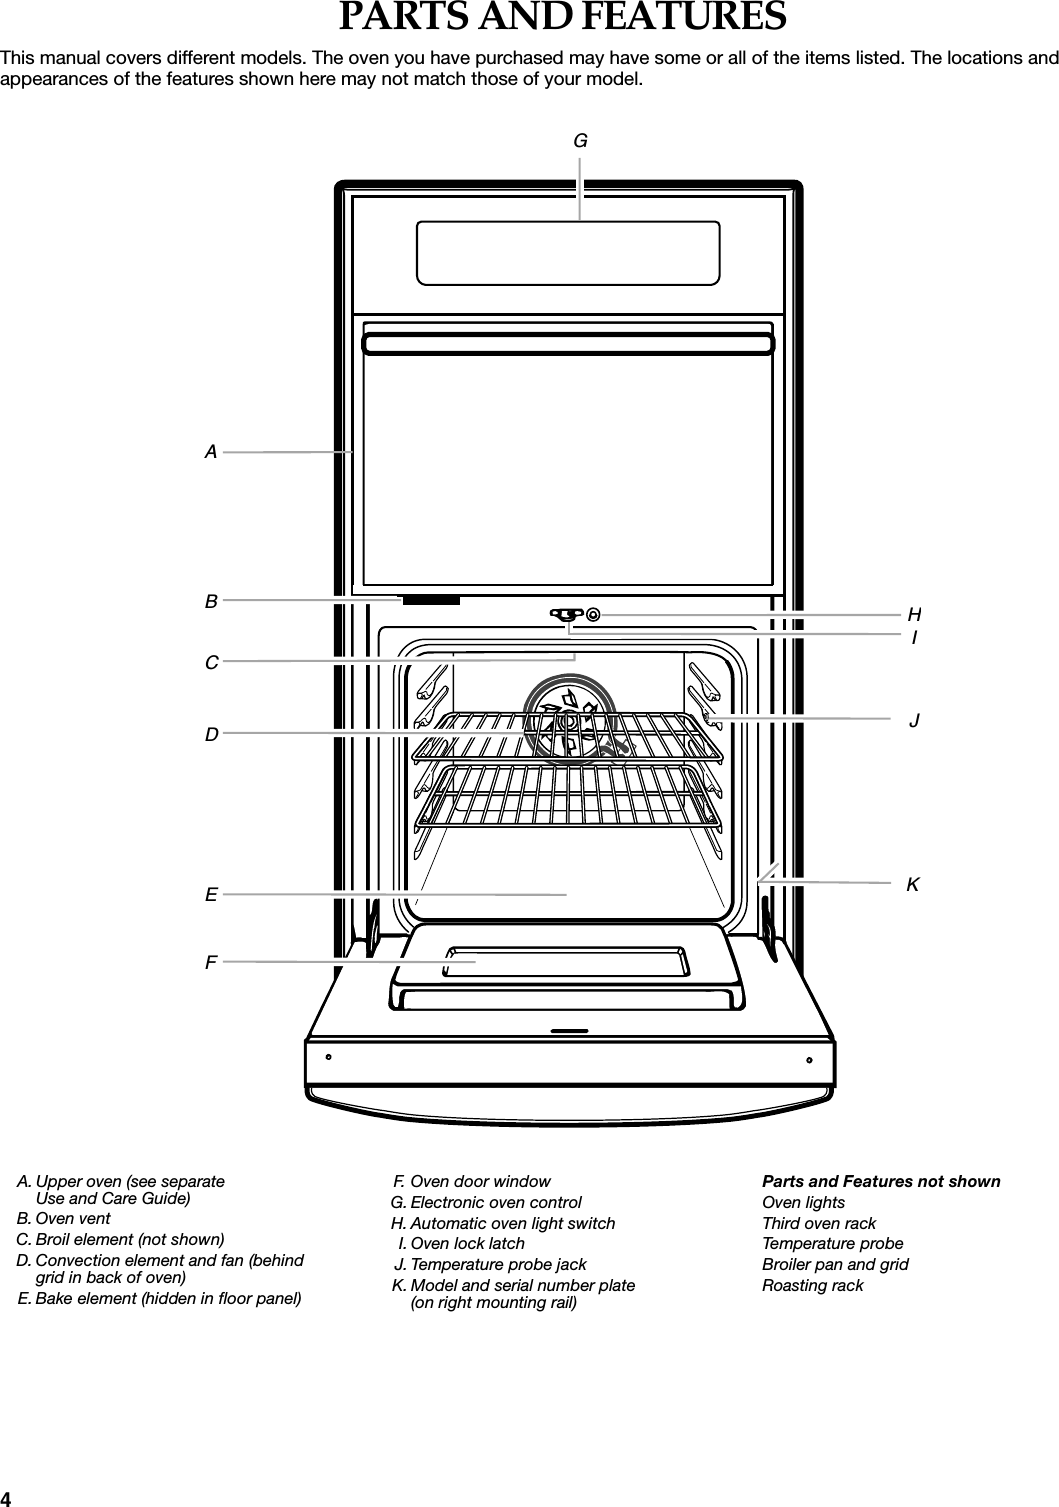 4PARTS AND FEATURESThis manual covers different models. The oven you have purchased may have some or all of the items listed. The locations and appearances of the features shown here may not match those of your model.A. Upper oven (see separate Use and Care Guide) B. Oven ventC. Broil element (not shown)D. Convection element and fan (behind grid in back of oven)E. Bake element (hidden in floor panel)F. Oven door windowG. Electronic oven controlH. Automatic oven light switchI. Oven lock latchJ. Temperature probe jackK. Model and serial number plate (on right mounting rail)Parts and Features not shownOven lightsThird oven rackTemperature probeBroiler pan and gridRoasting rackGBEAFHIKJCD